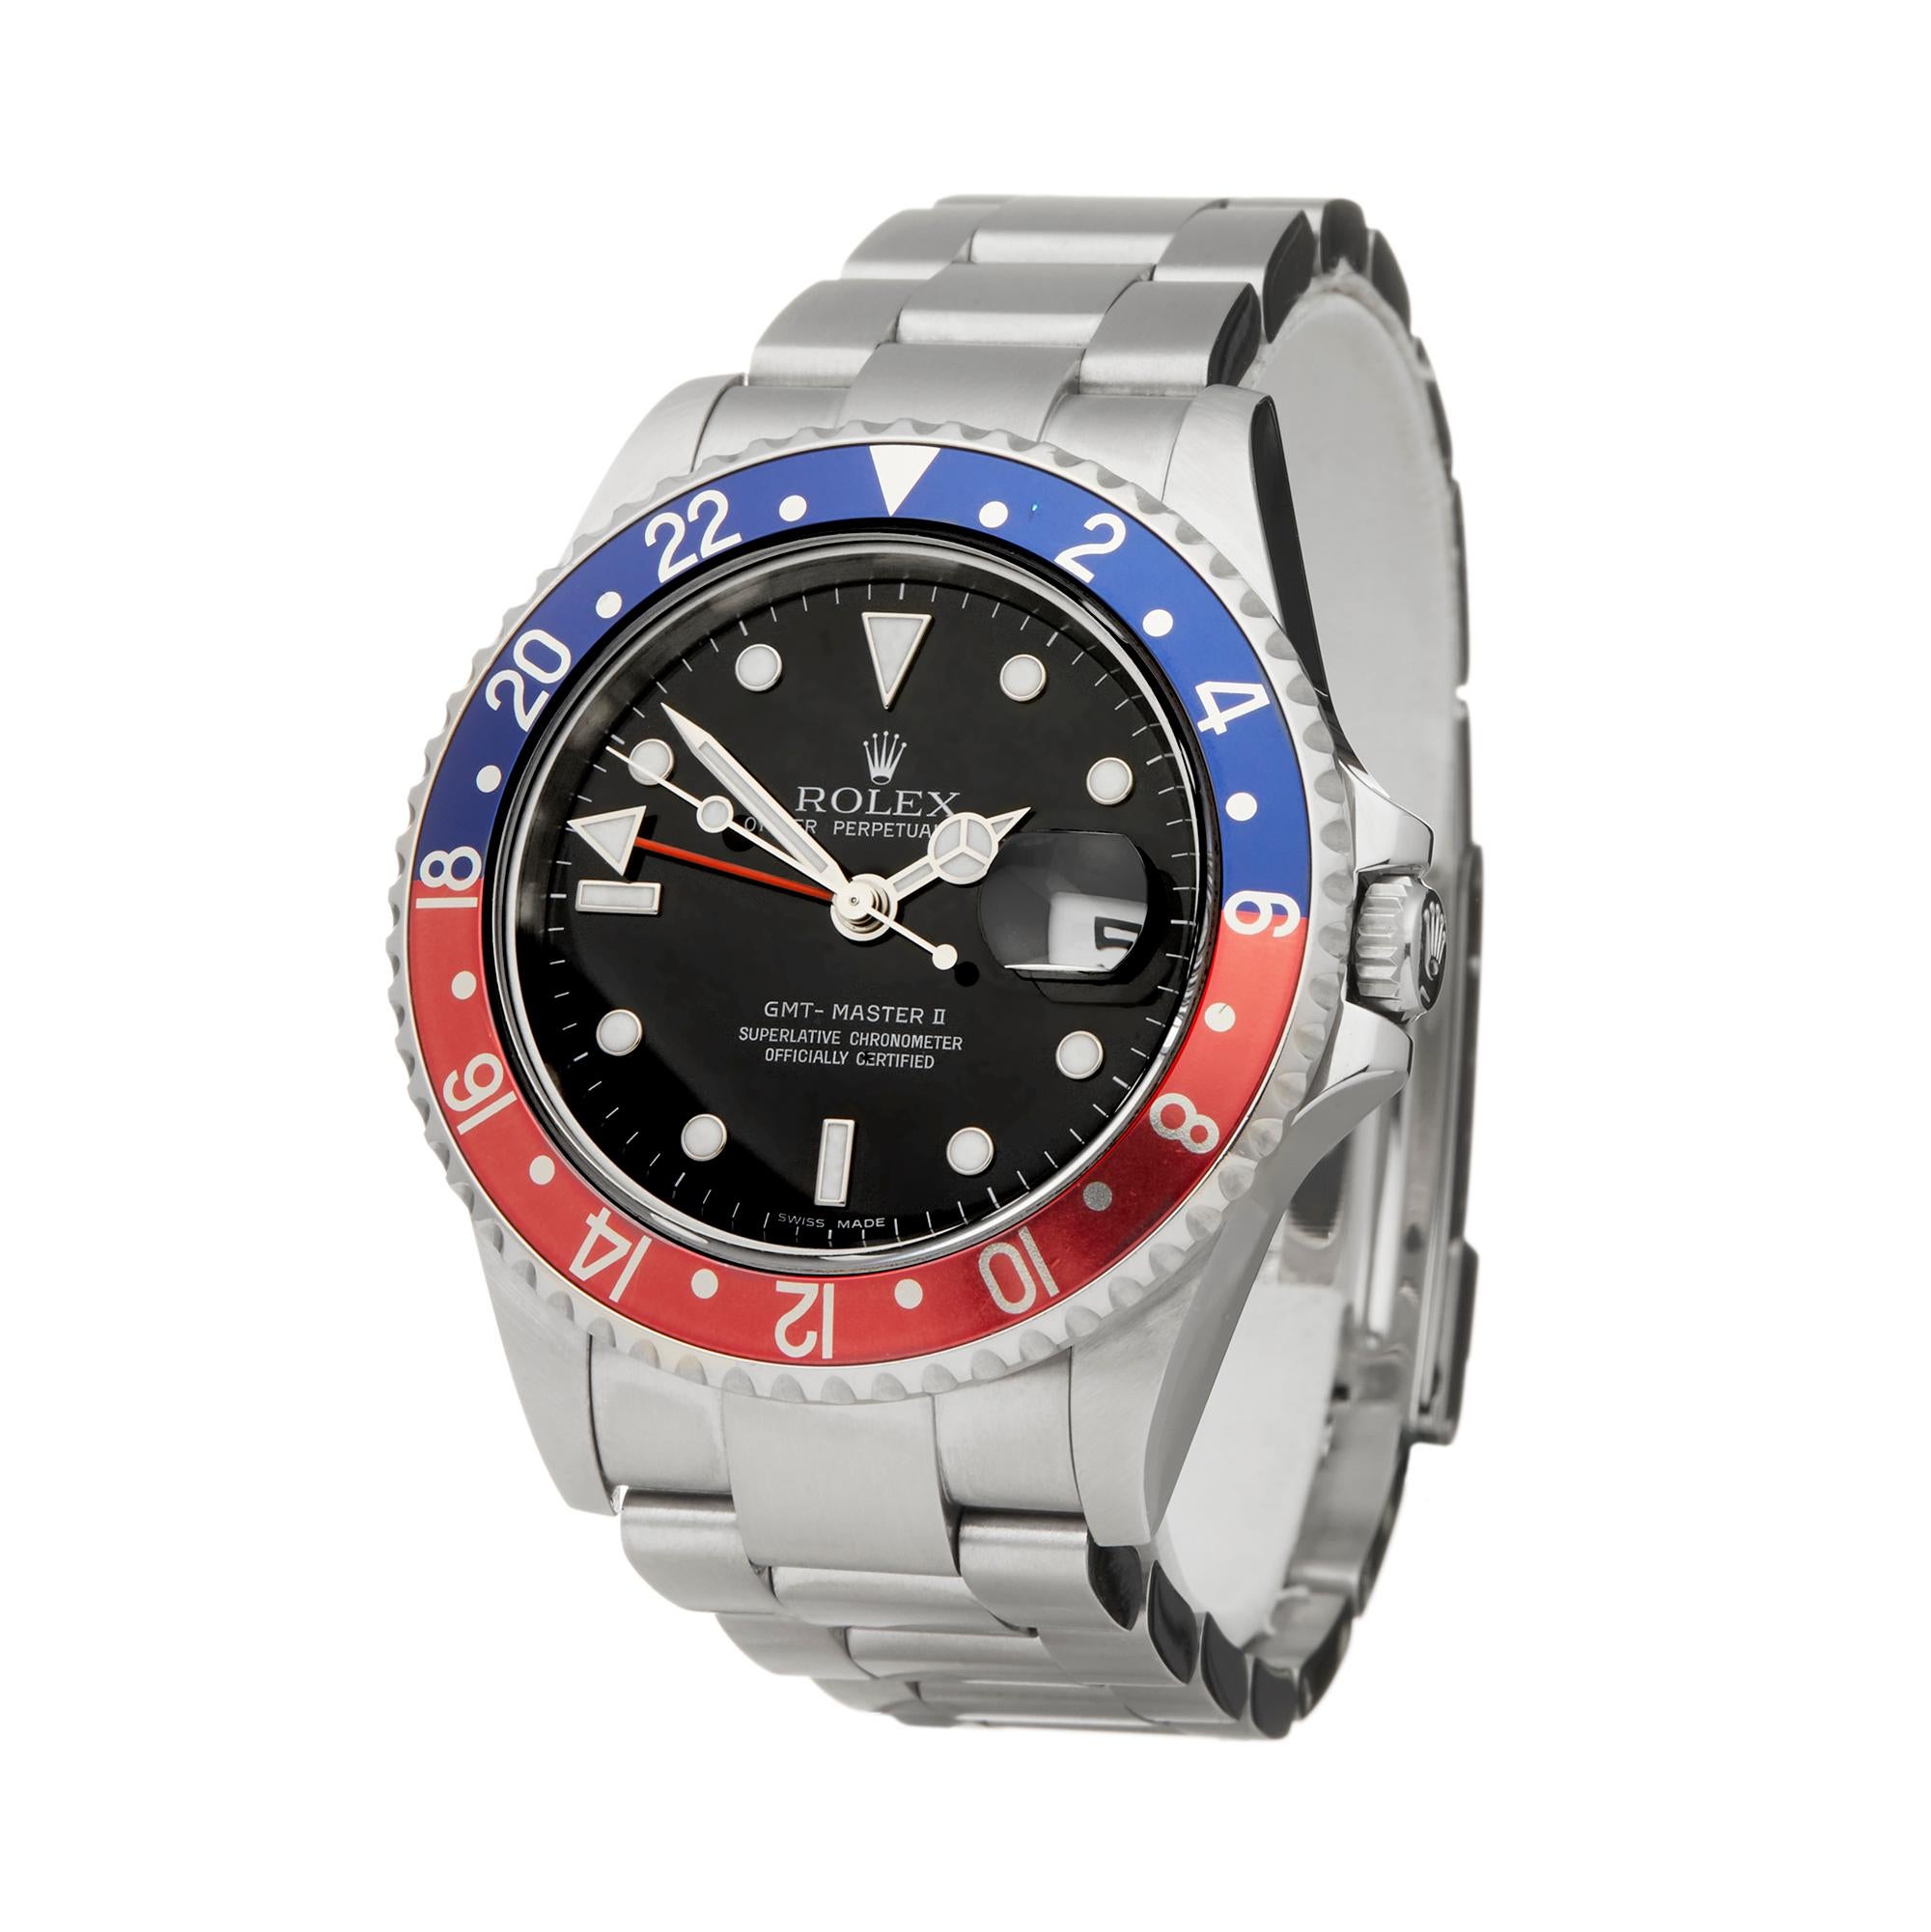 Ref: W6017
Manufacturer: Rolex
Model: GMT-Master II
Model Ref: 16710
Age: 20th June 2007
Gender: Mens
Complete With: Box, Manuals, Guarantee & Card Holder
Dial: Black
Glass: Sapphire Crystal
Movement: Automatic
Water Resistance: To Manufacturers